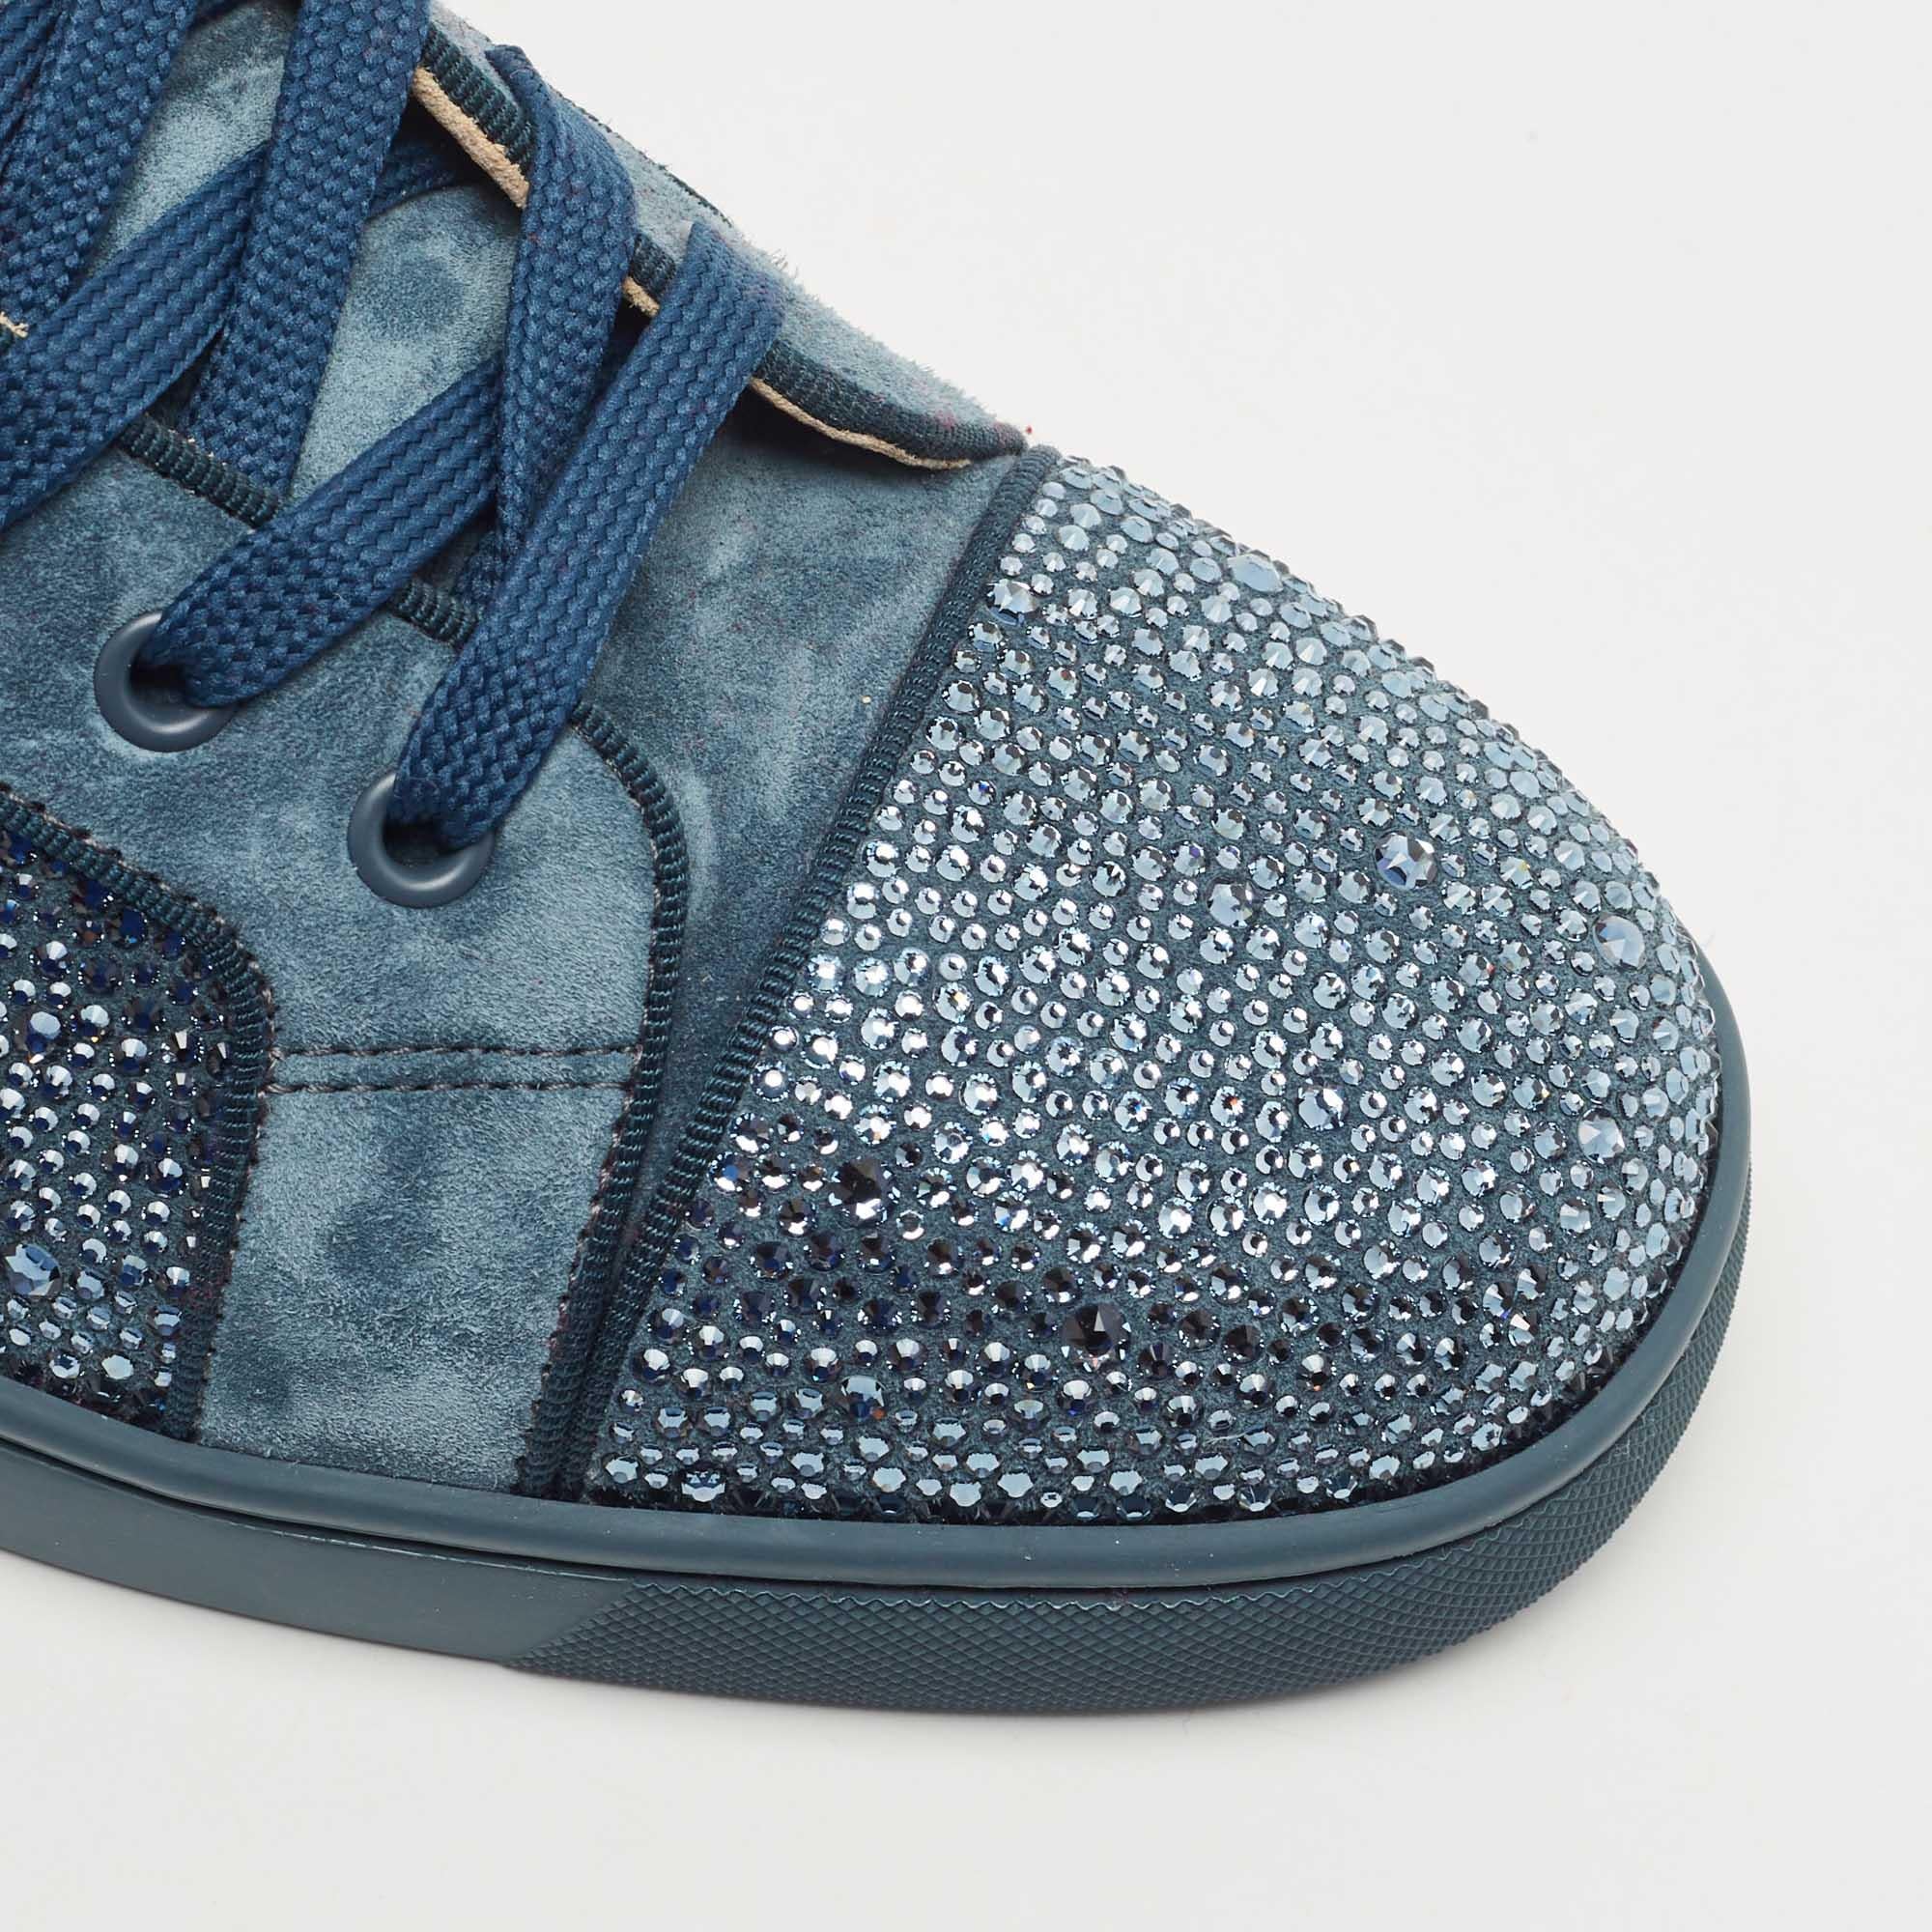 Christian Louboutin Grey Suede Louis Strass High Top Sneakers Size 41 1